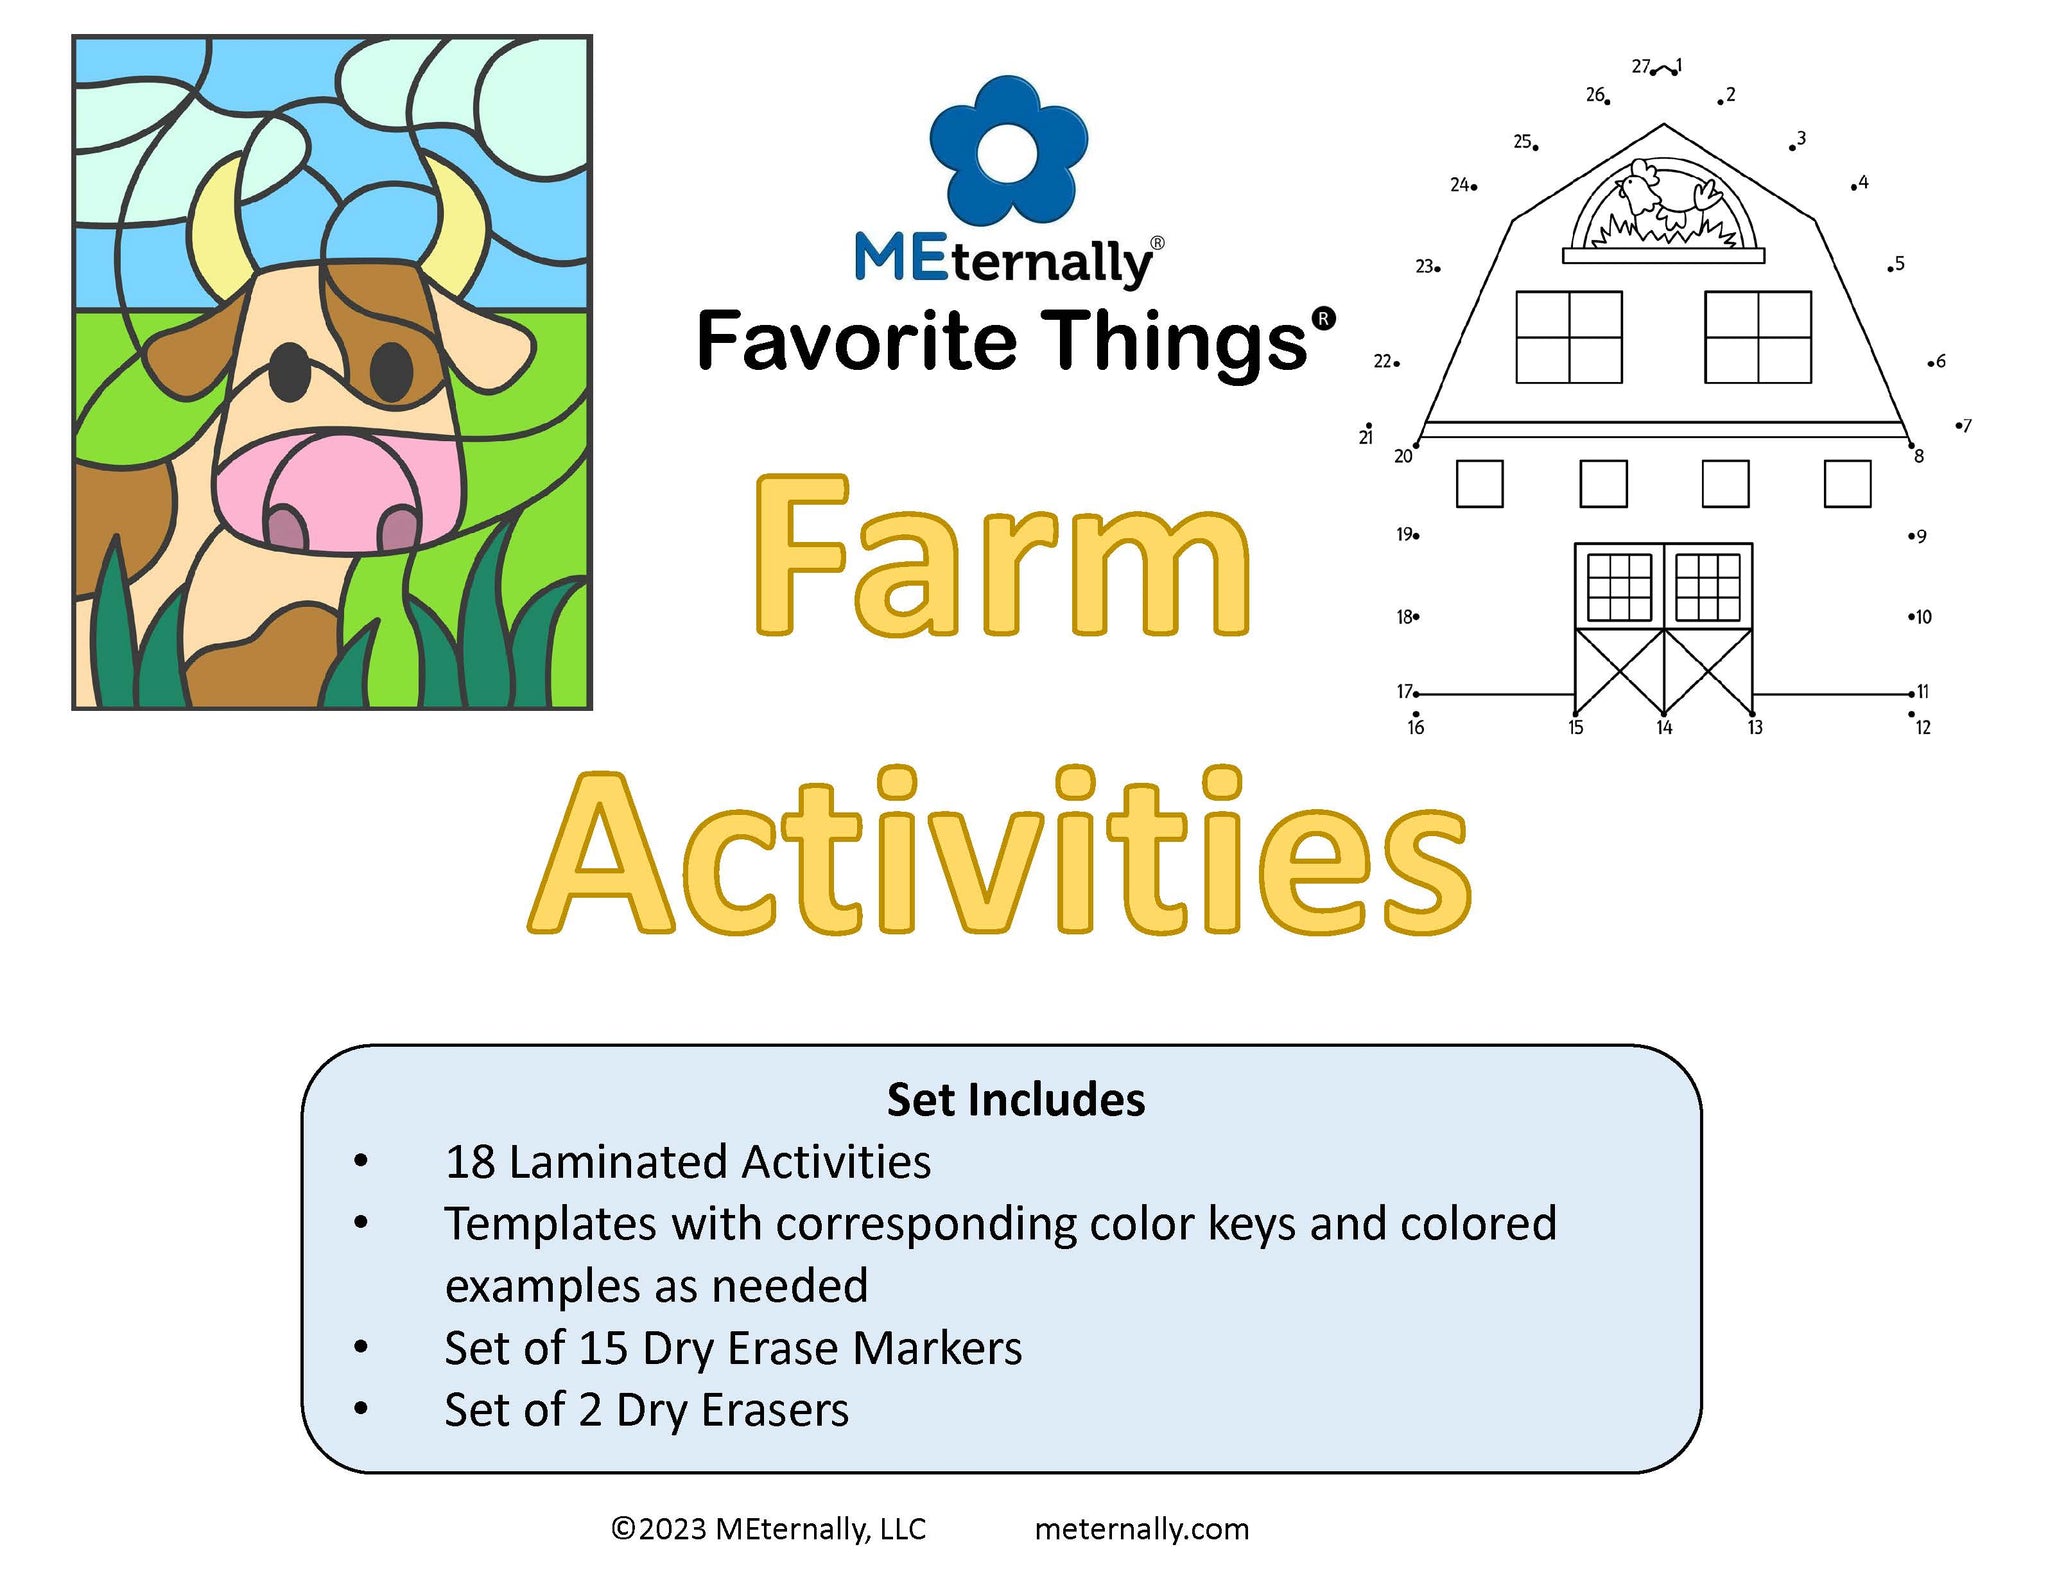 Favorite Things - Farm Activity Pack